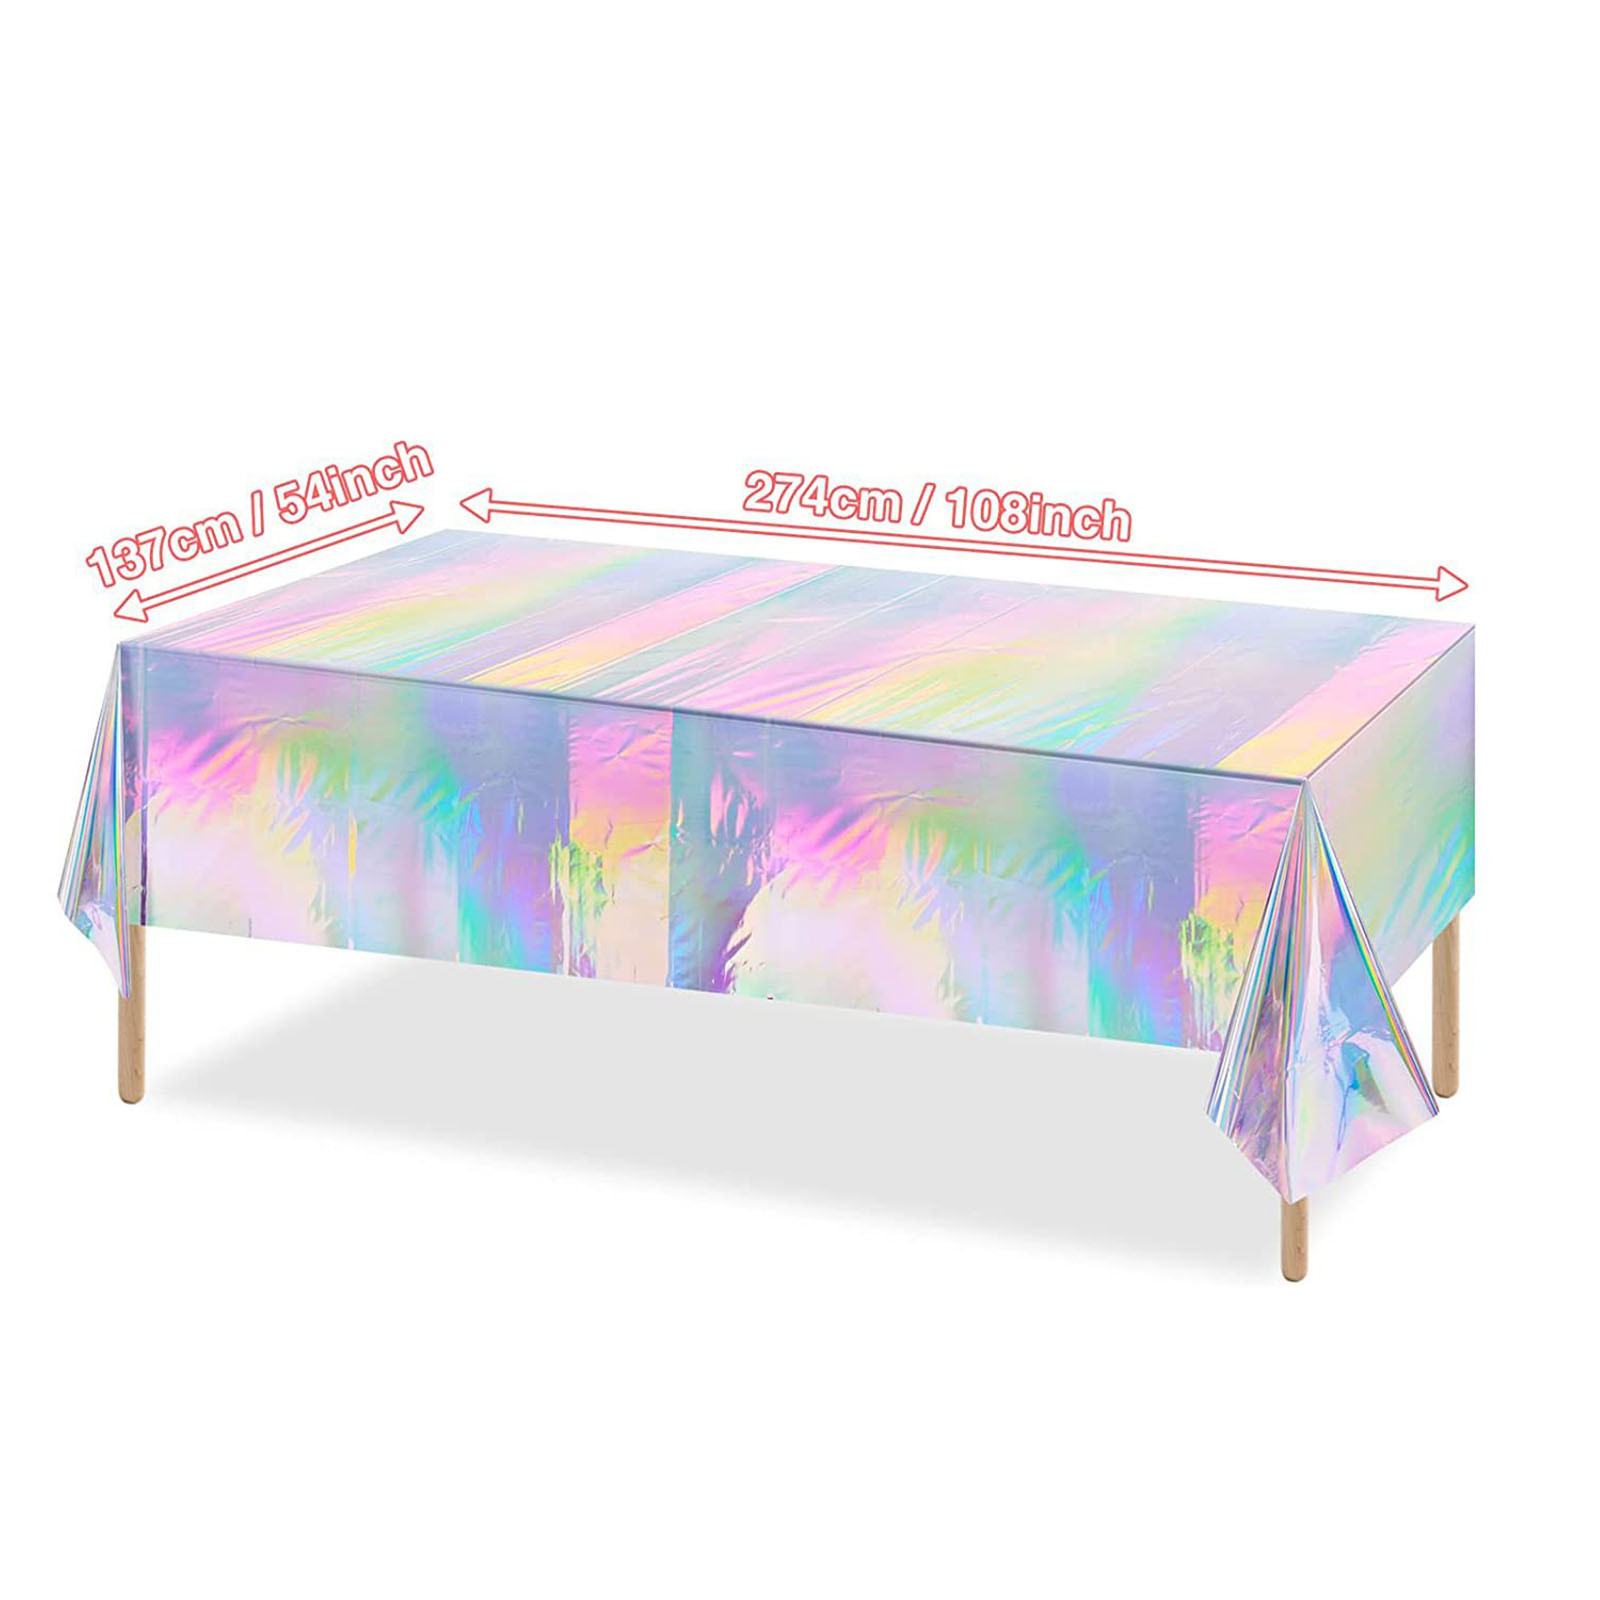 WQQZJJ Tablecloth Holographic Foil Table Cover Party Decortions Theme ...